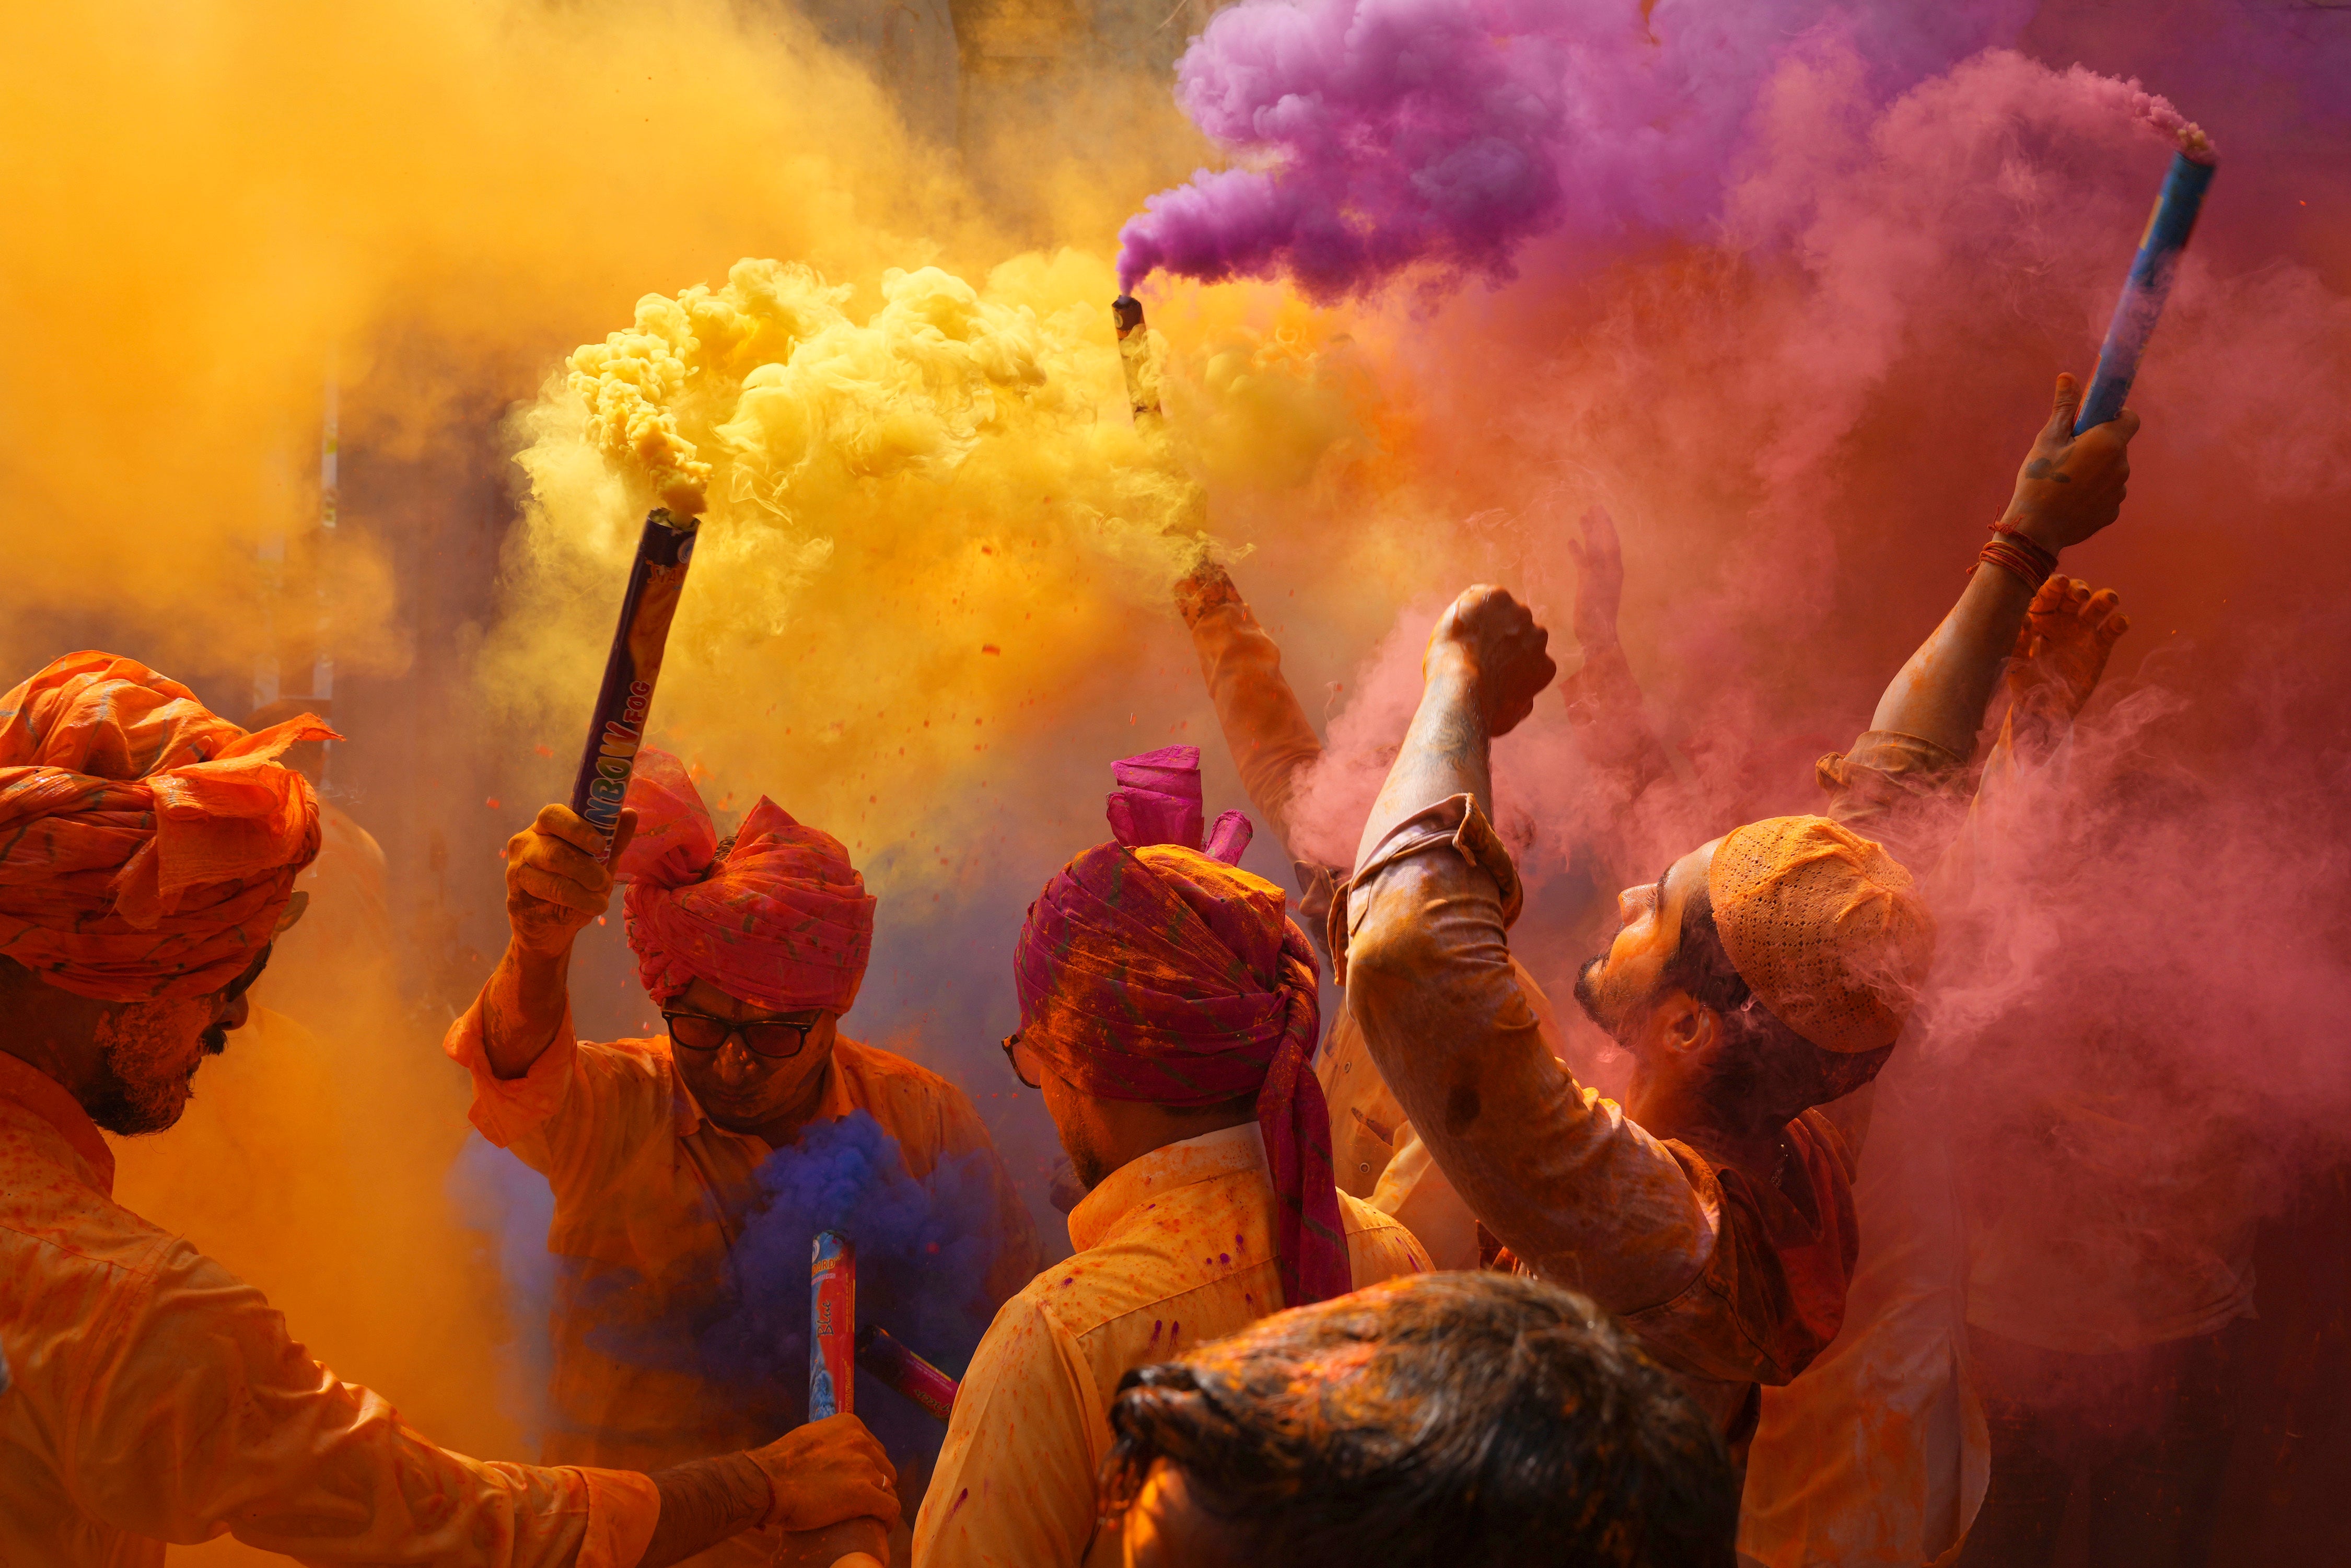 People sing, dance and throw colors at each other to celebrate Holi festival in Hyderabad, India